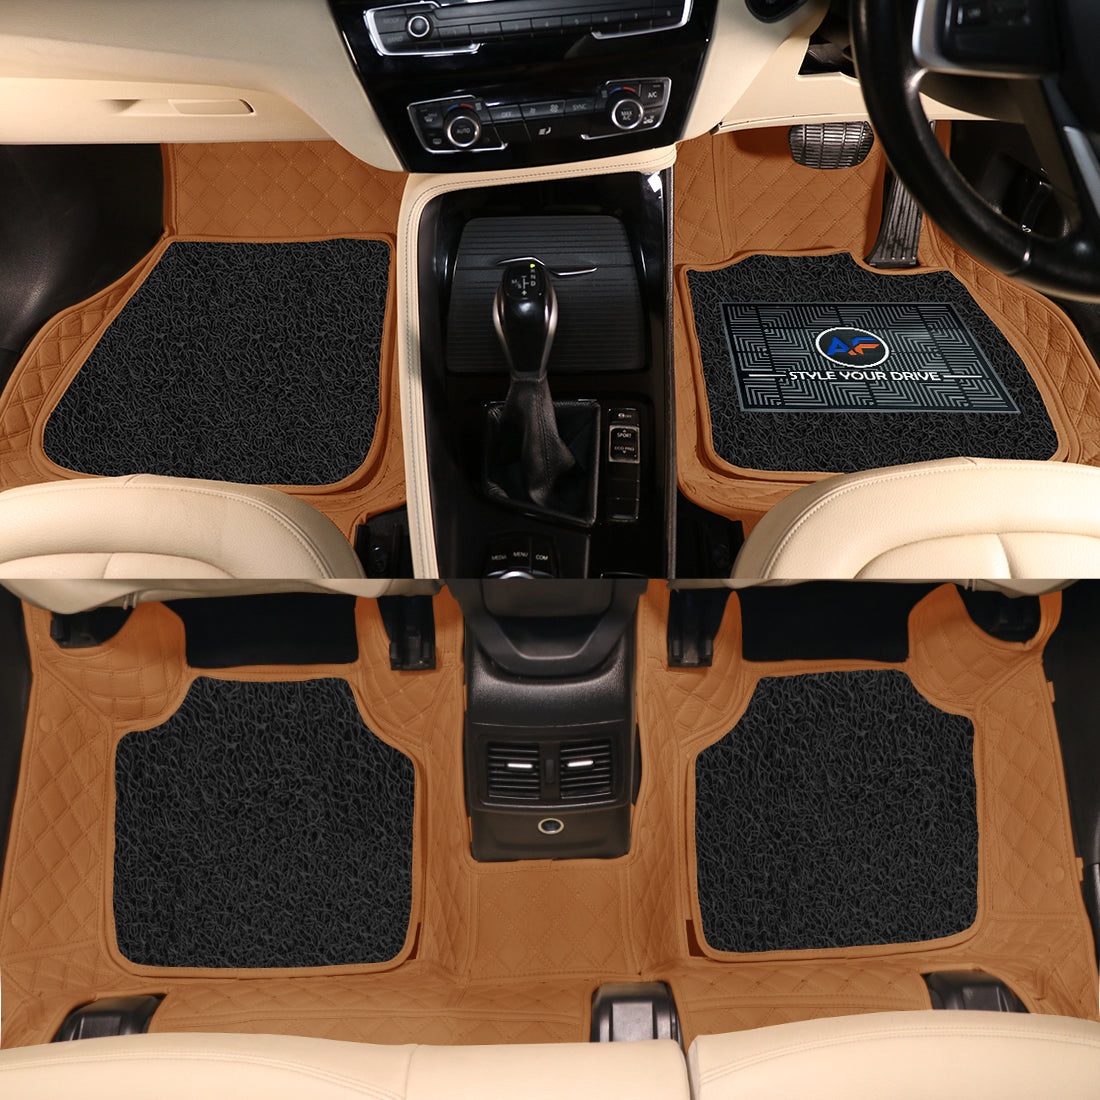 Land Rover Range Rover Velar 2019 7D Luxury Car Mat, All Weather Proof, Anti-Skid, 100% Waterproof & Odorless with Unique Diamond Fish Design (24mm Luxury PU Leather, 2 Rows)